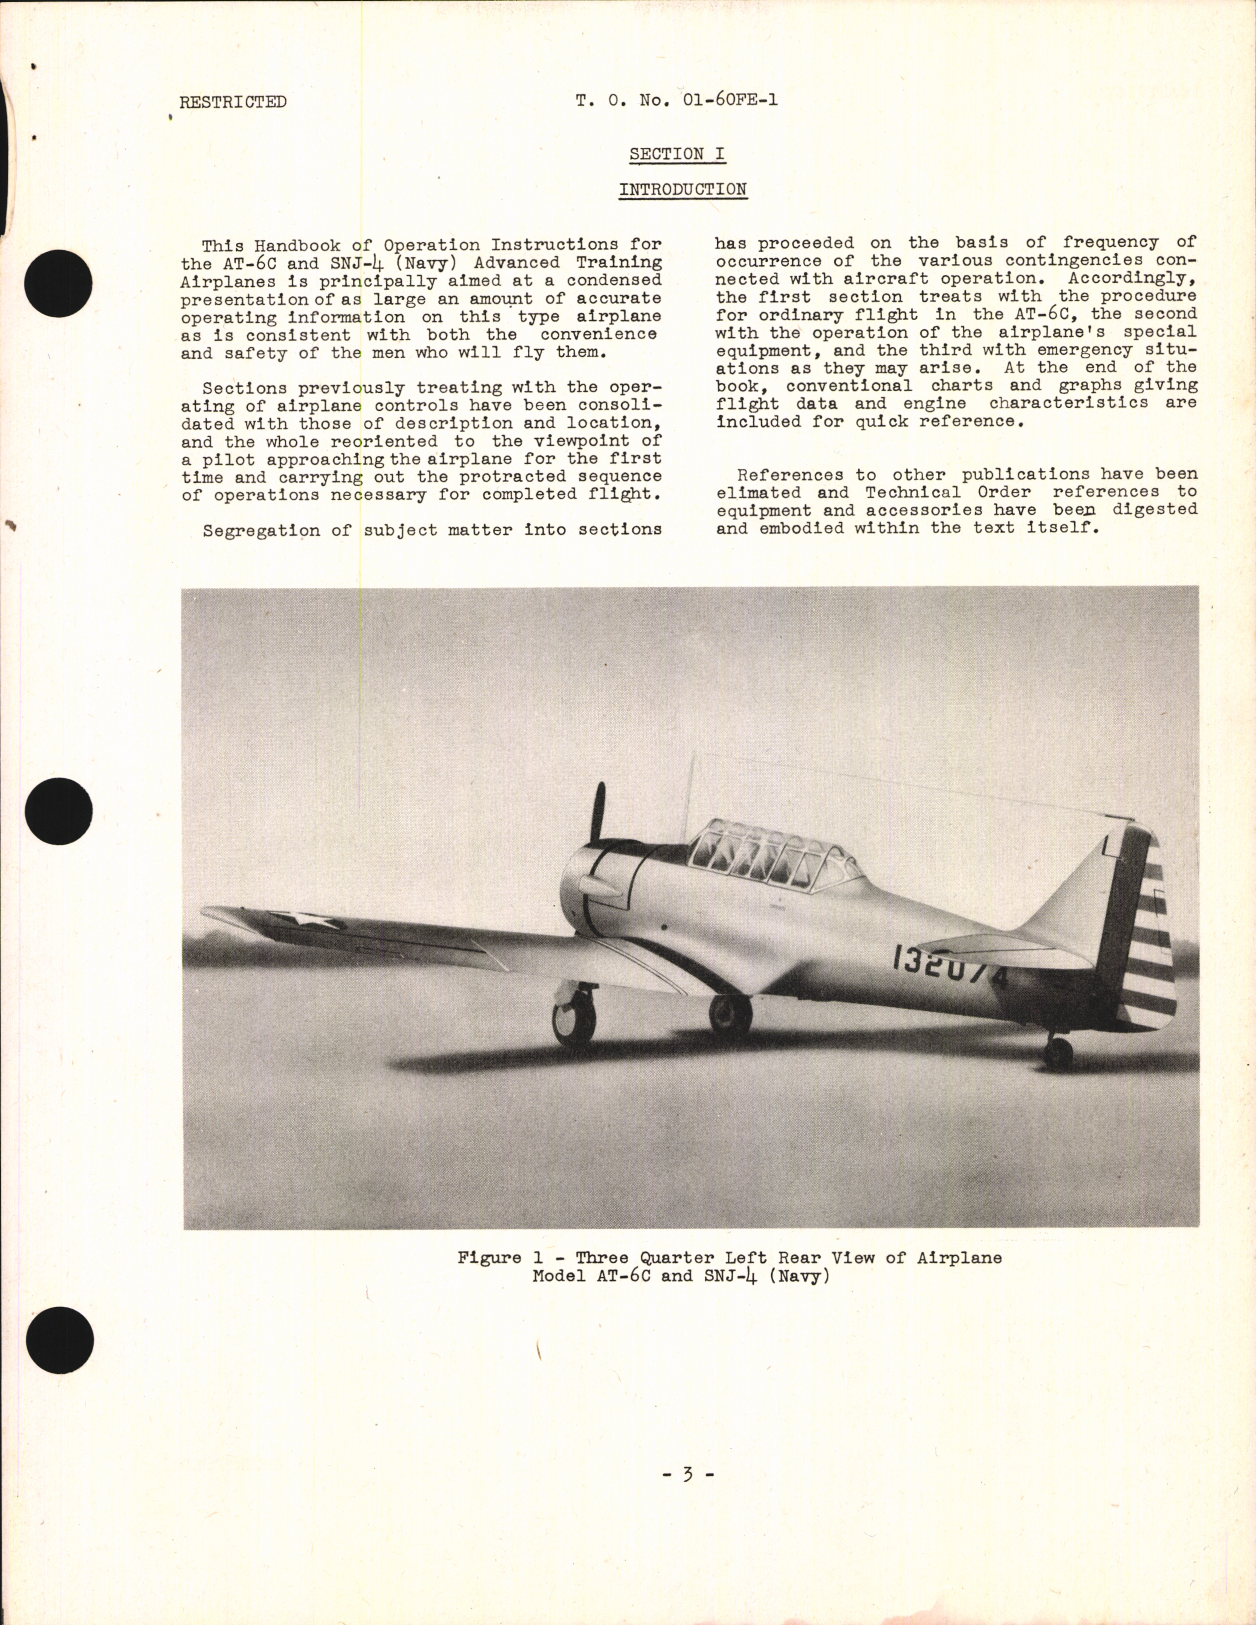 Sample page 5 from AirCorps Library document: Operation and Flight Instructions for AT-6C and SNJ-4 Training Airplanes